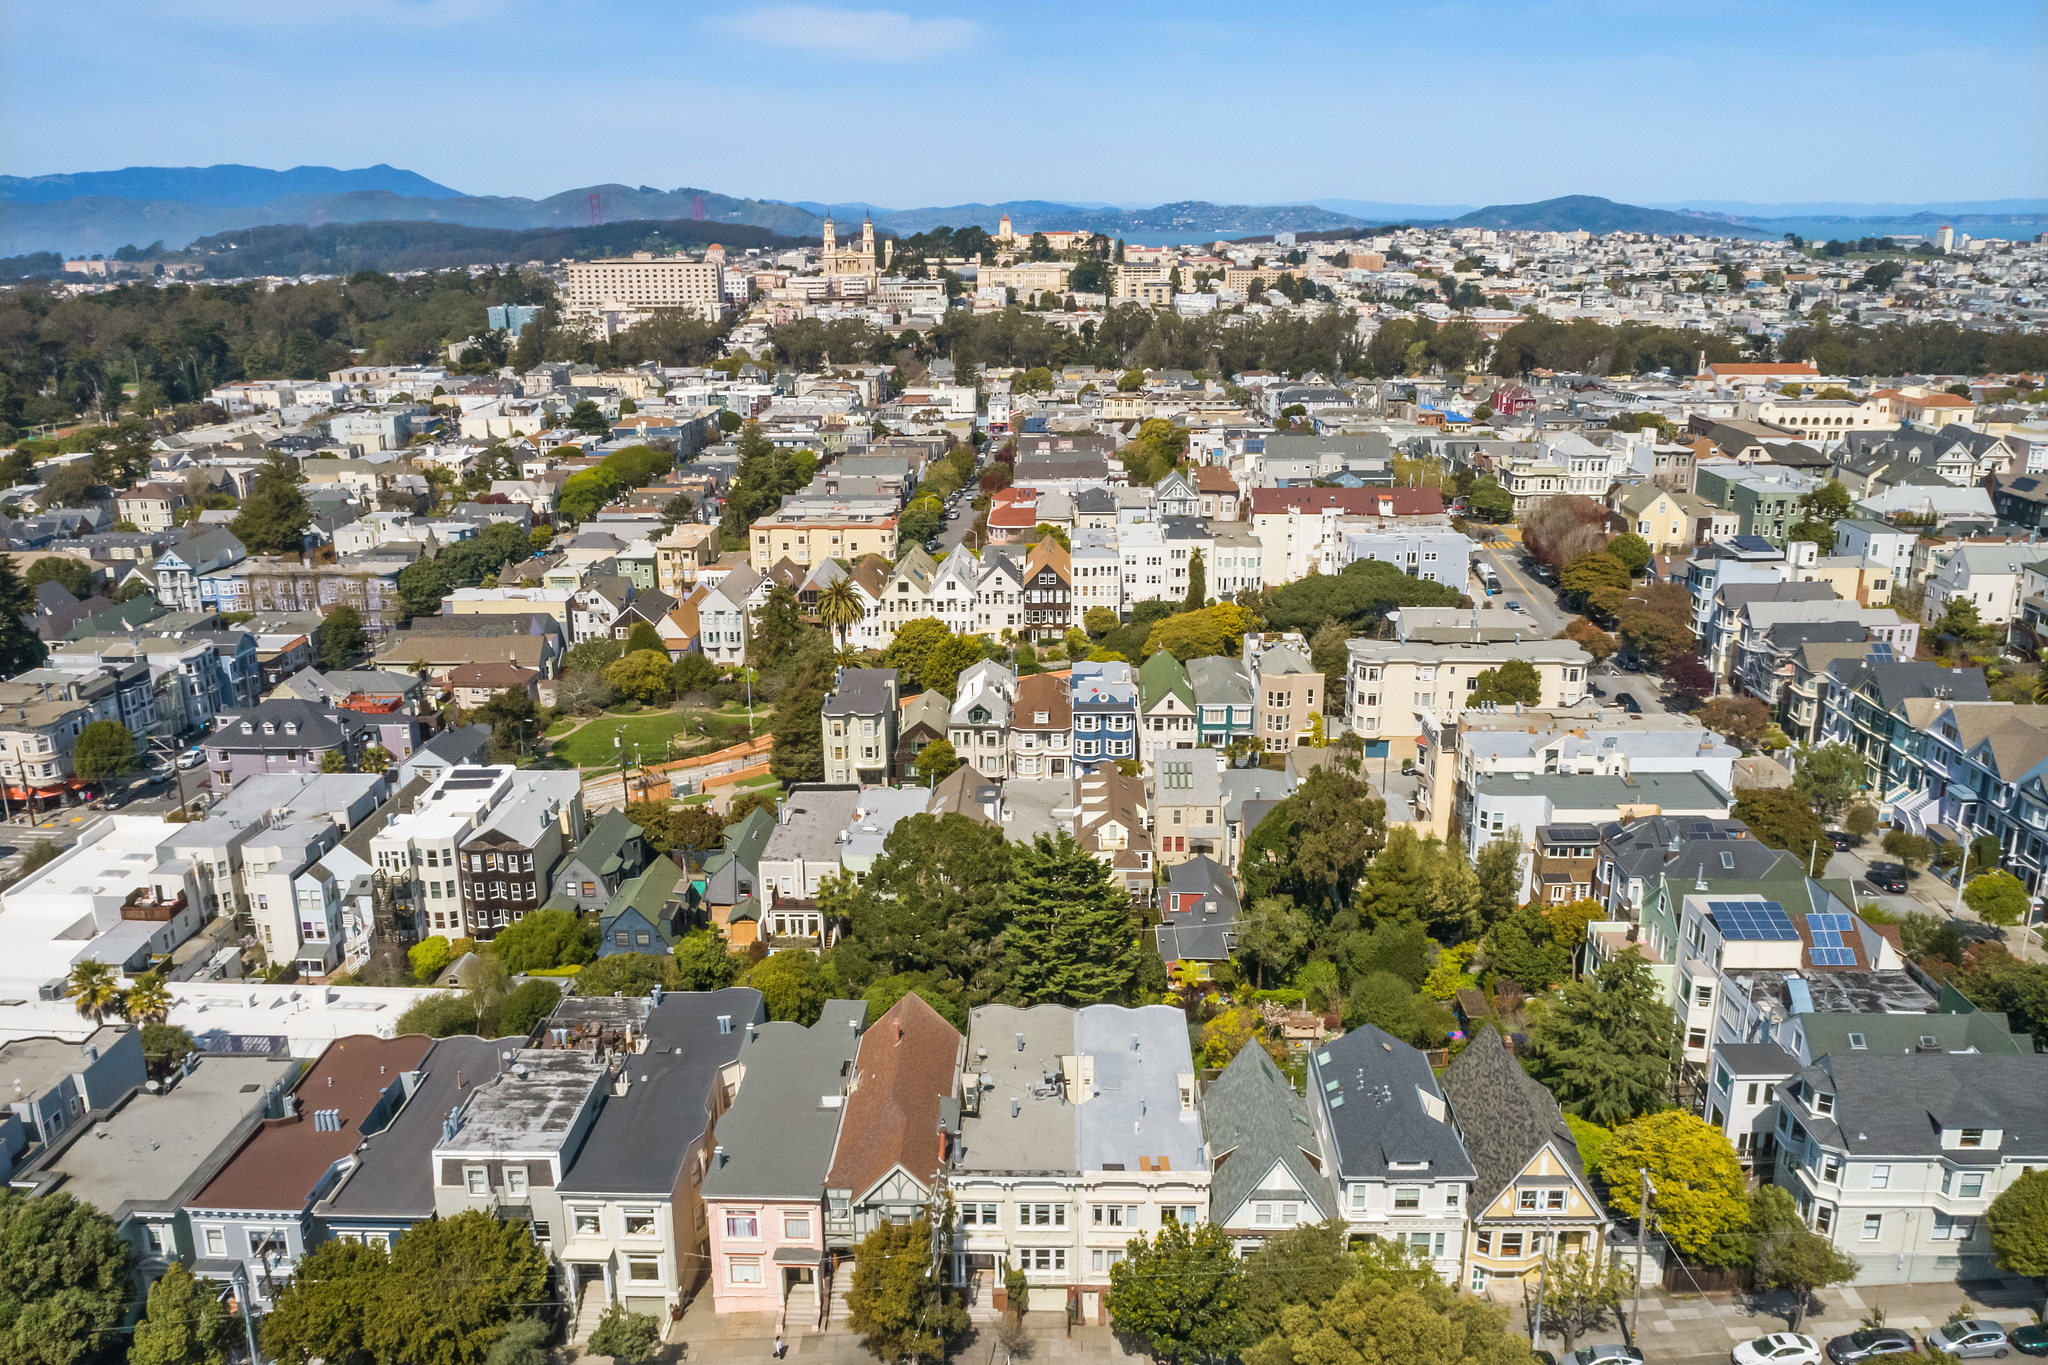 Property Photo: Aerial view of 38 Parnassus Avenue, featuring the greater Cole Valley neighborhood